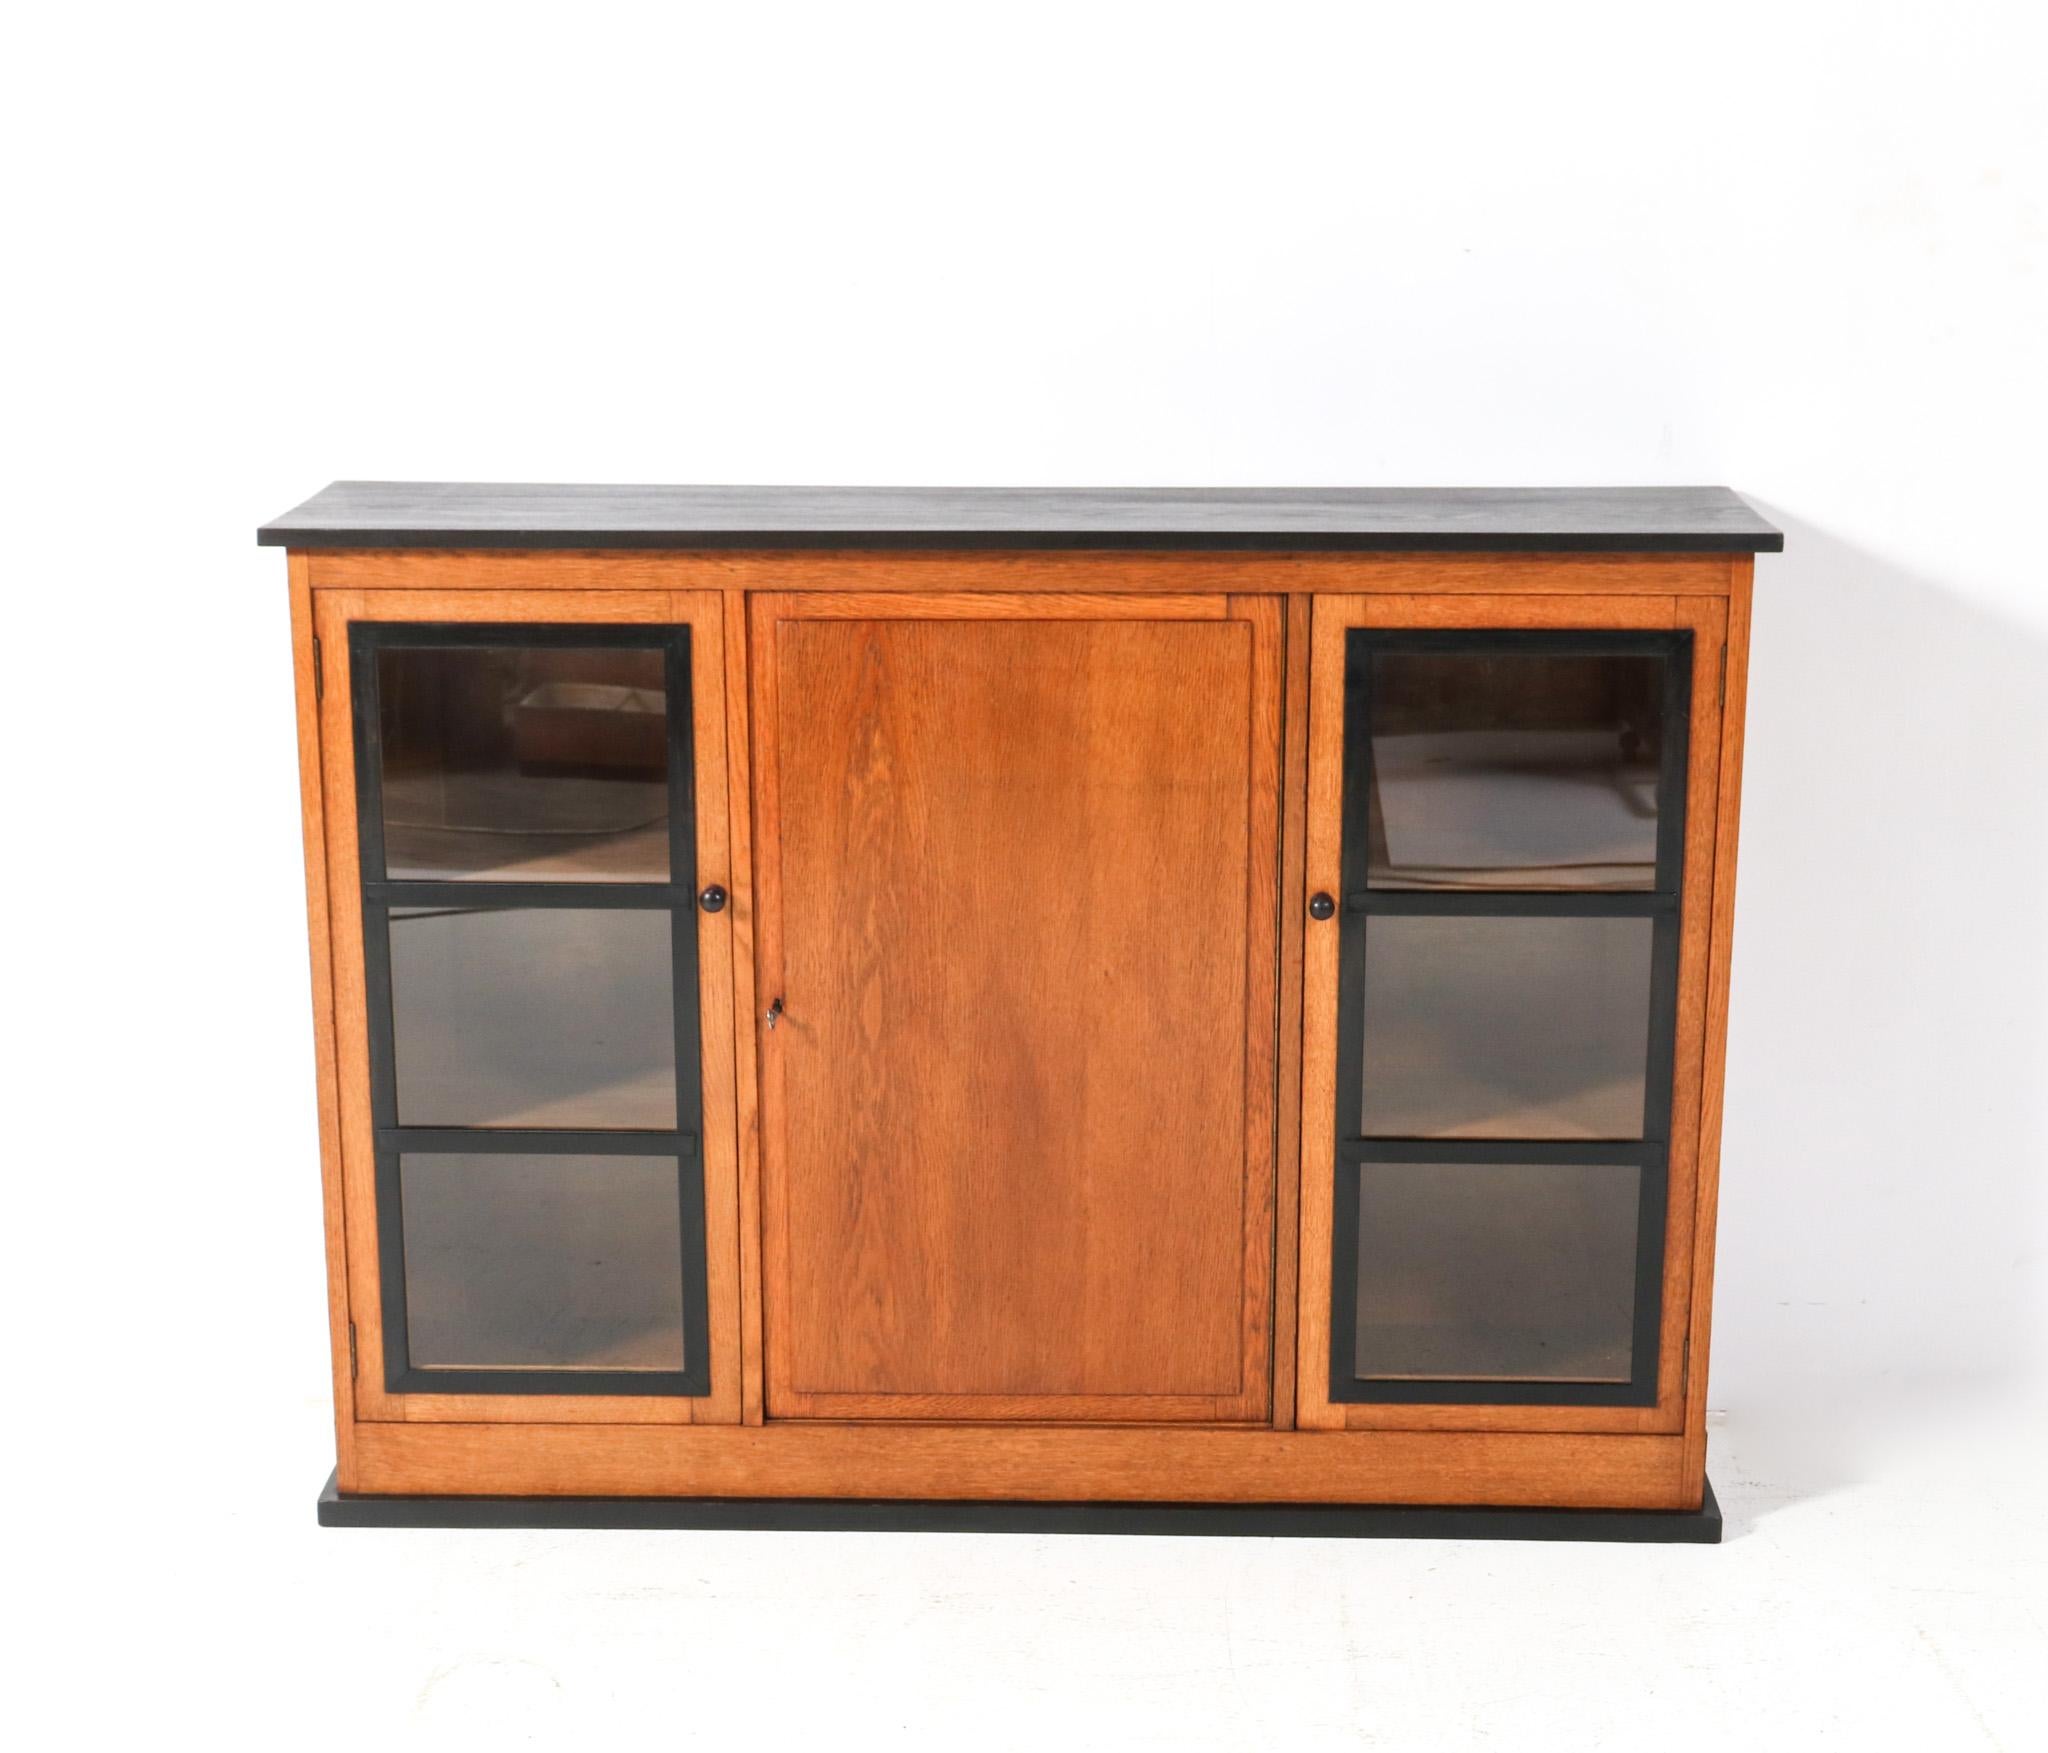 Magnificent and rare Art Deco Modernist bookcase.
Design by Jan Brunott.
Striking Dutch design from the 1920s.
Solid oak base with original black lacquered elements and original ebony handles on the doors.
Original black lacquered top.
Locks and